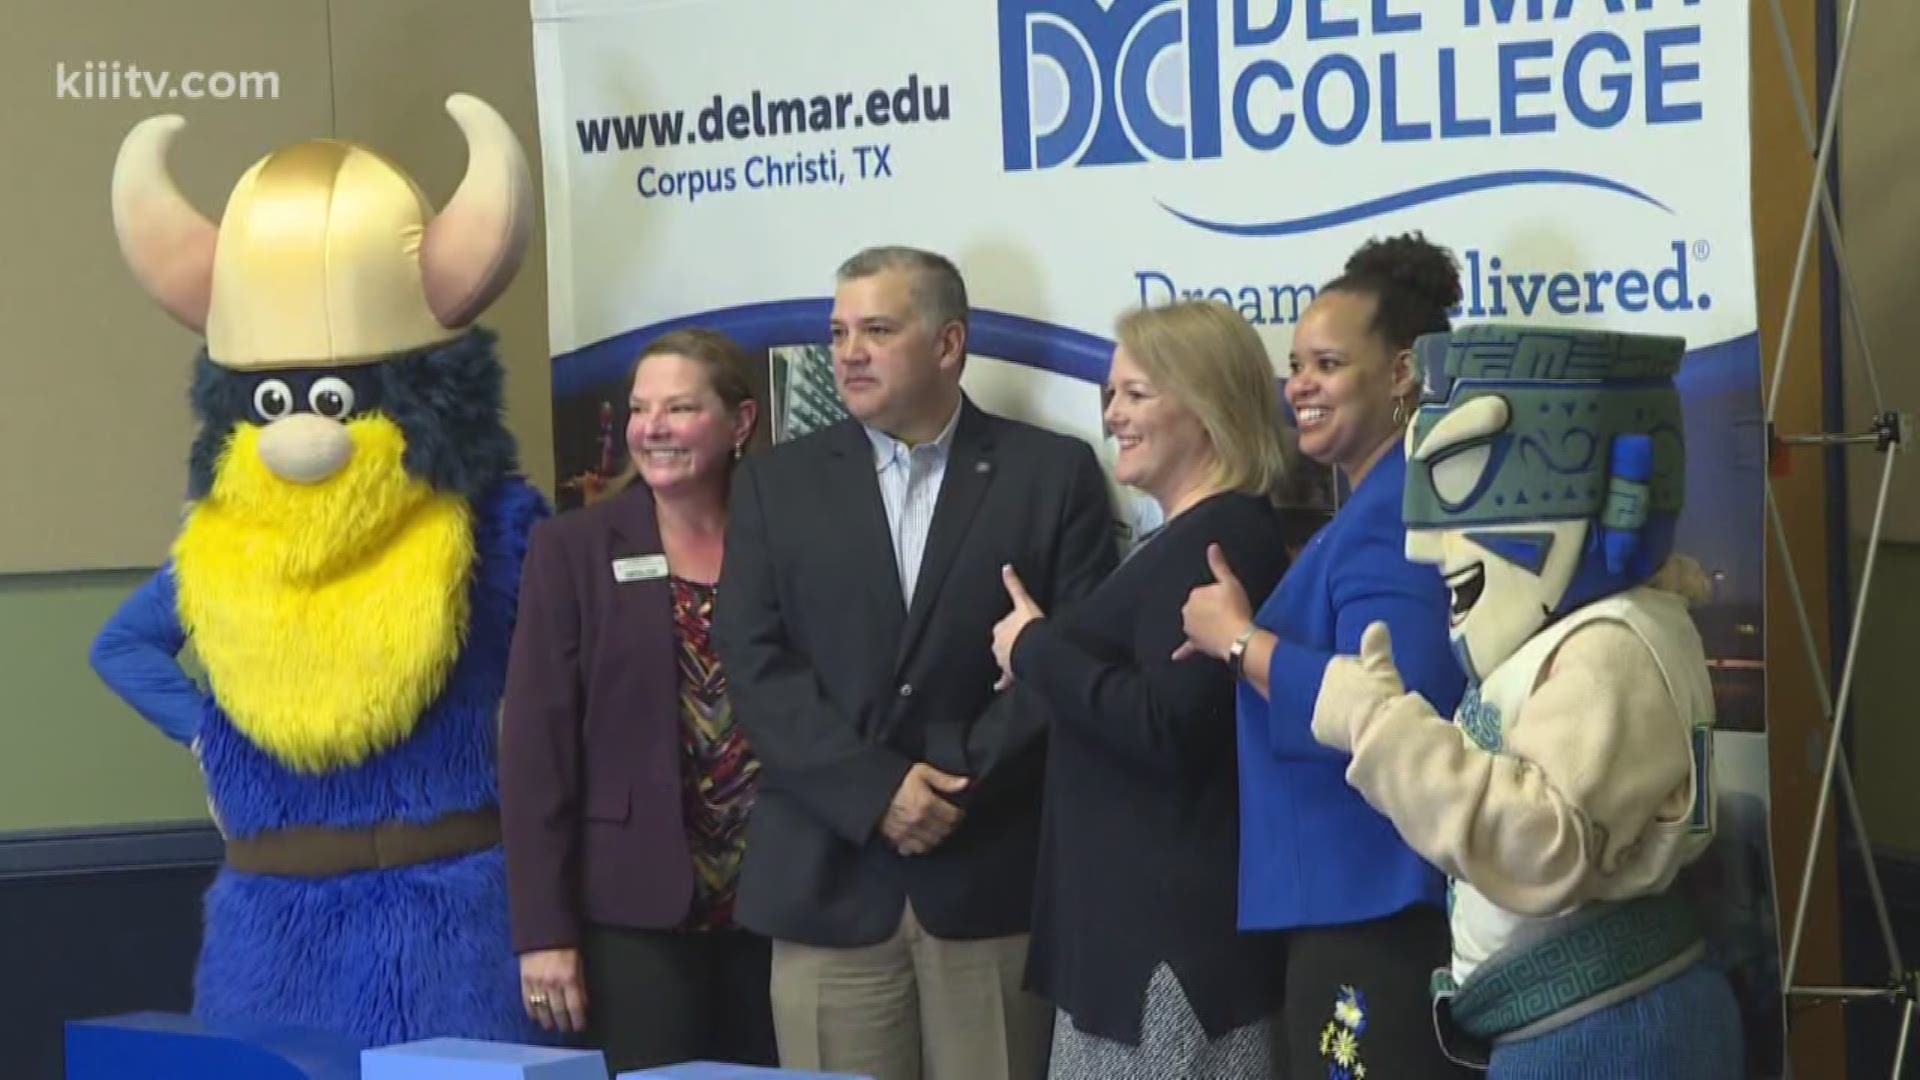 The partnership helps provide a smooth transition for students who want to finish their education at TAMUCC.